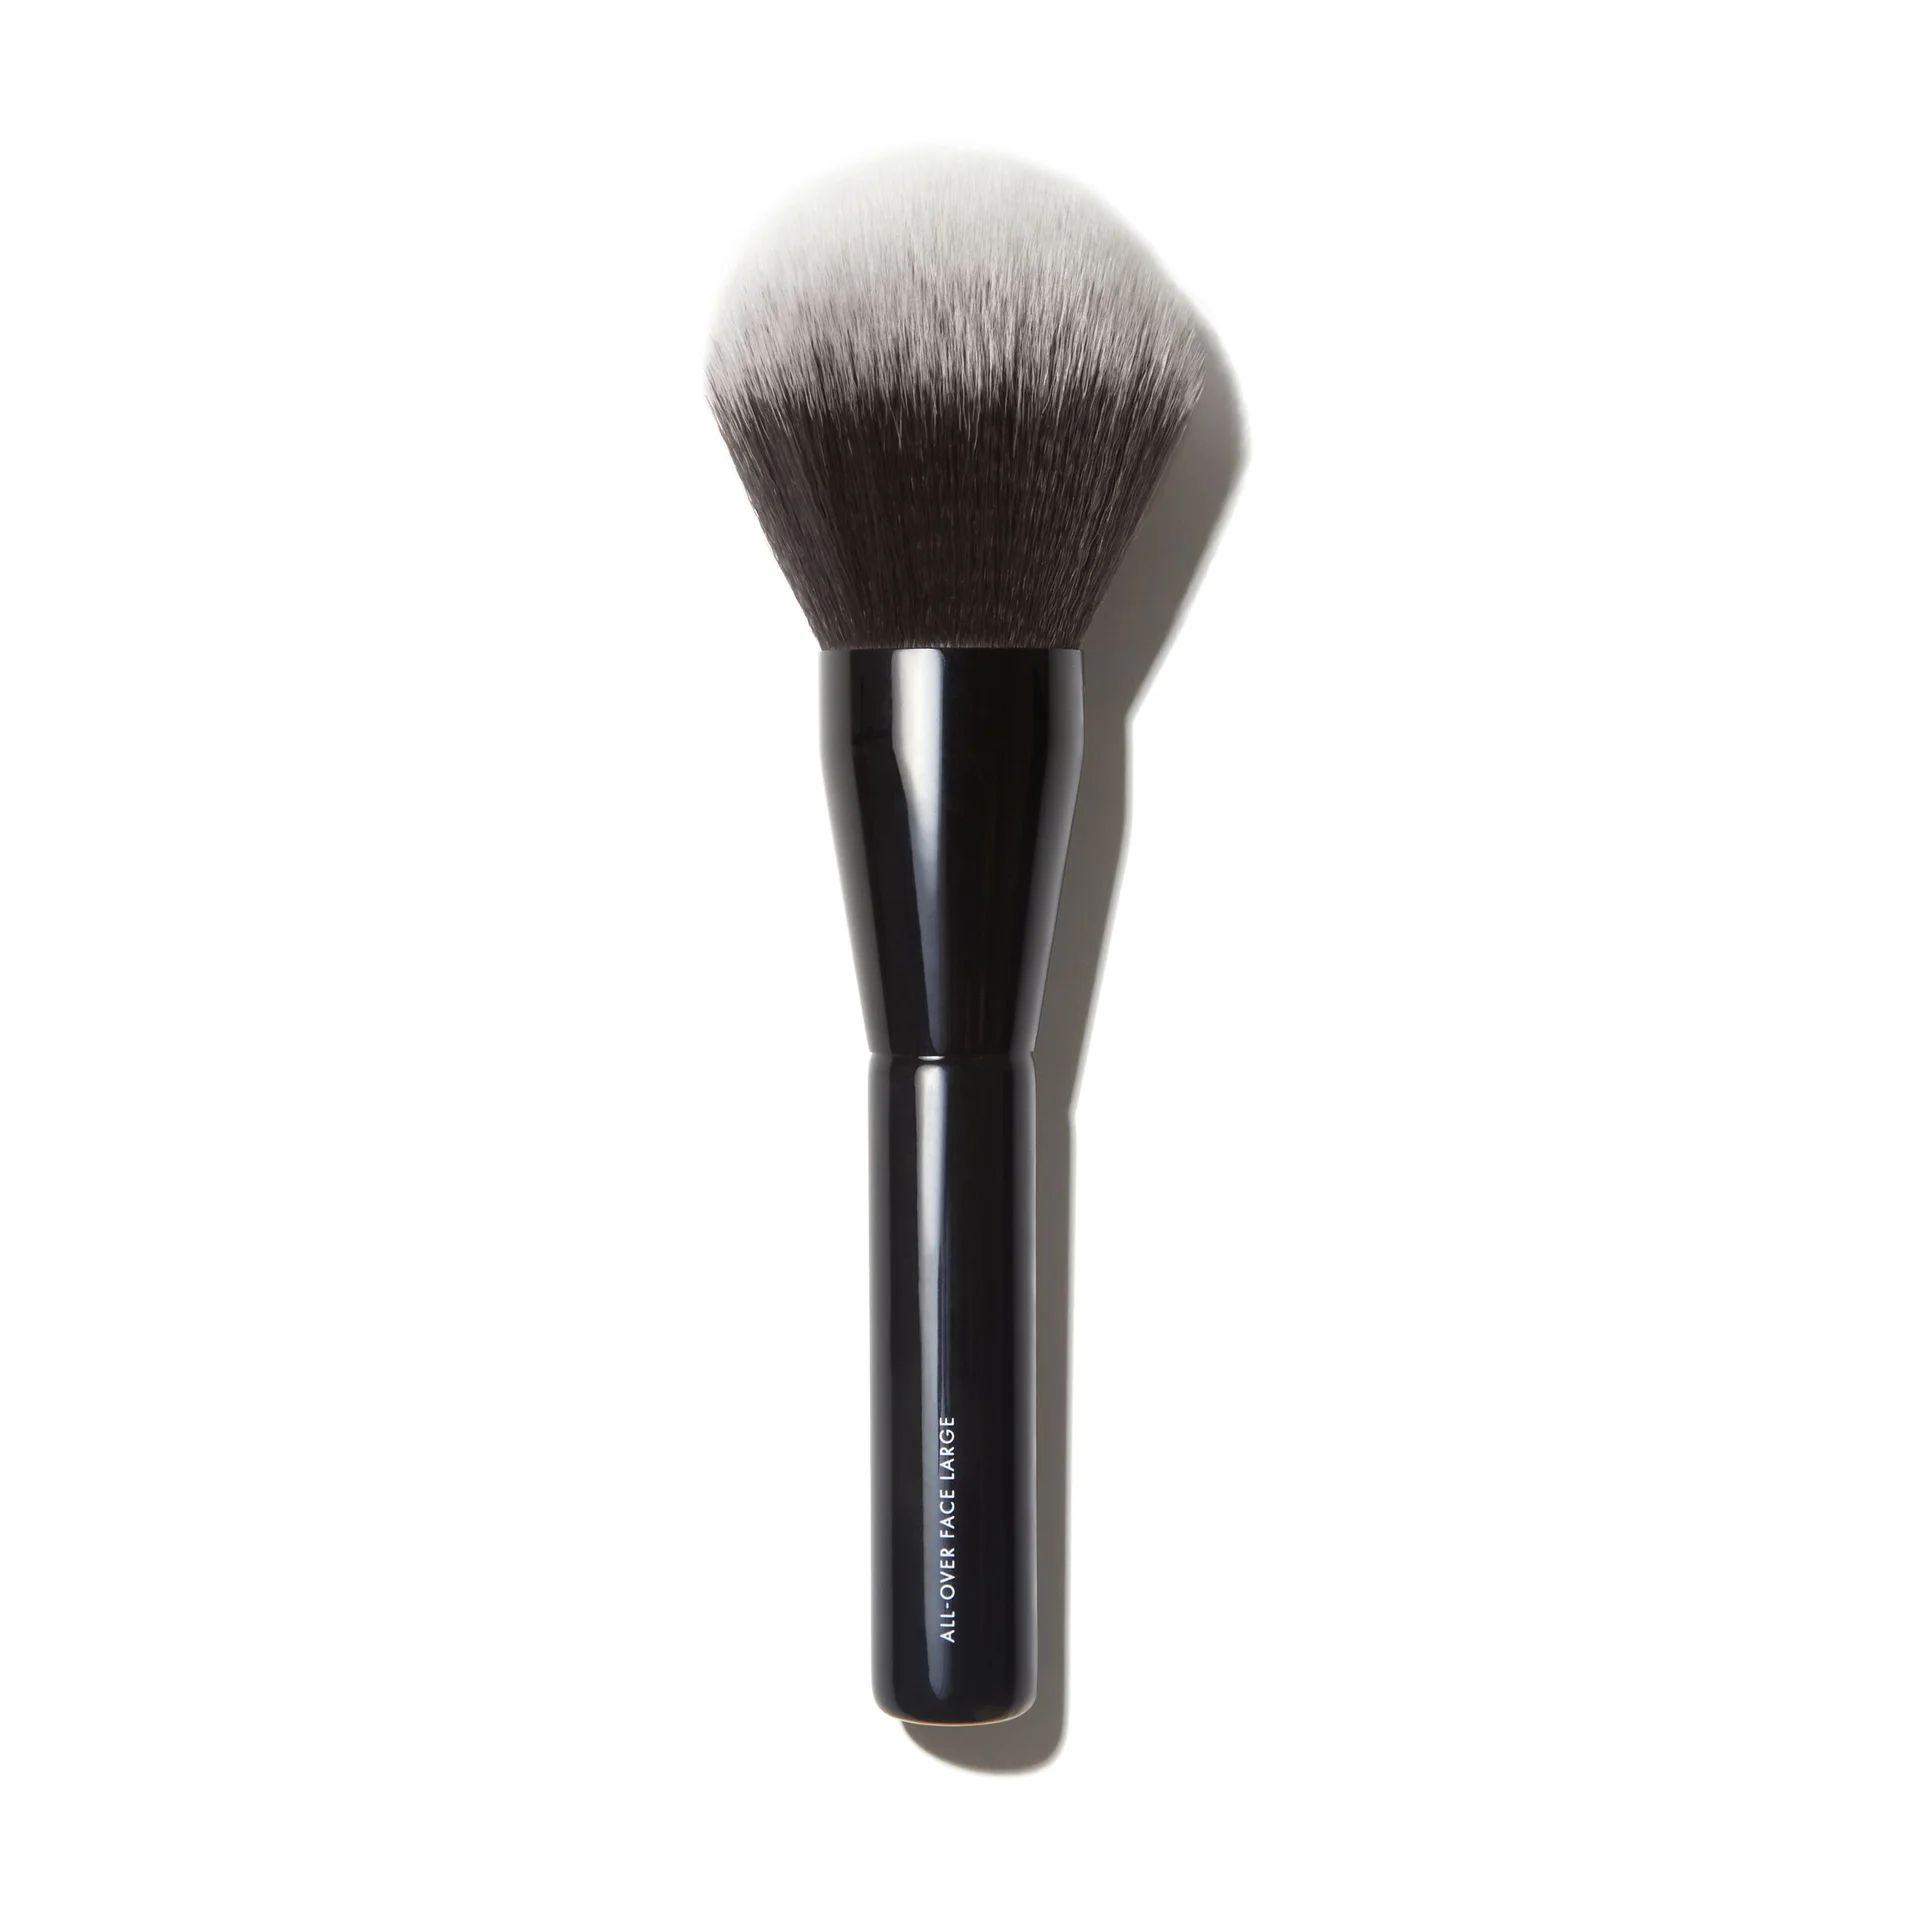 Large All-over Face Powder Brush | Beauty Pie (UK)